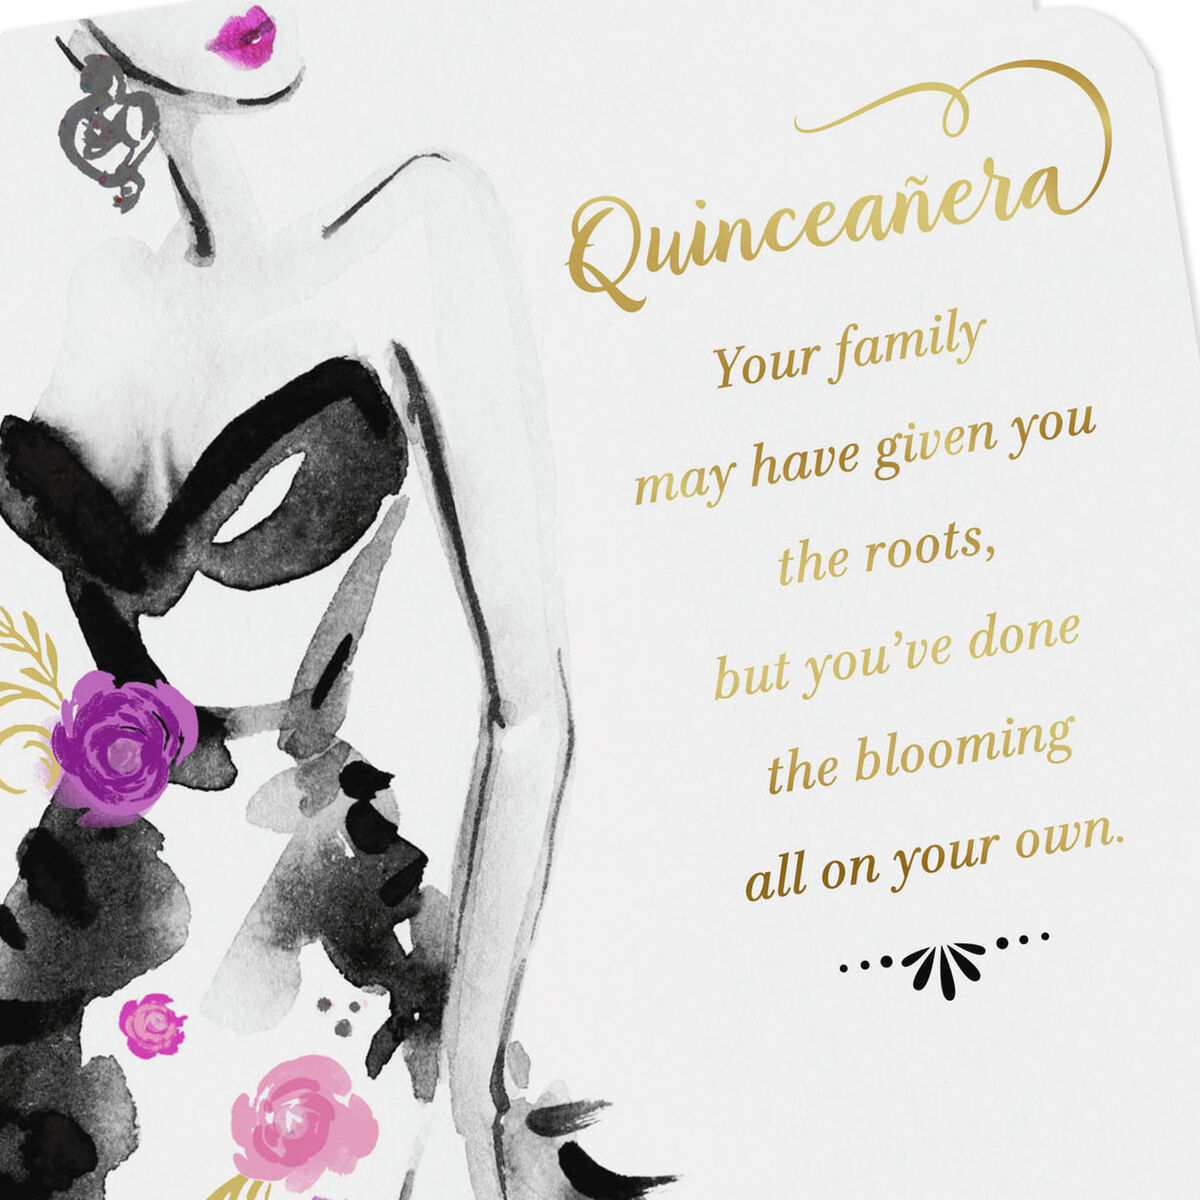 quinceanera-for-the-15th-birthday-greeting-card-zazzle-happy